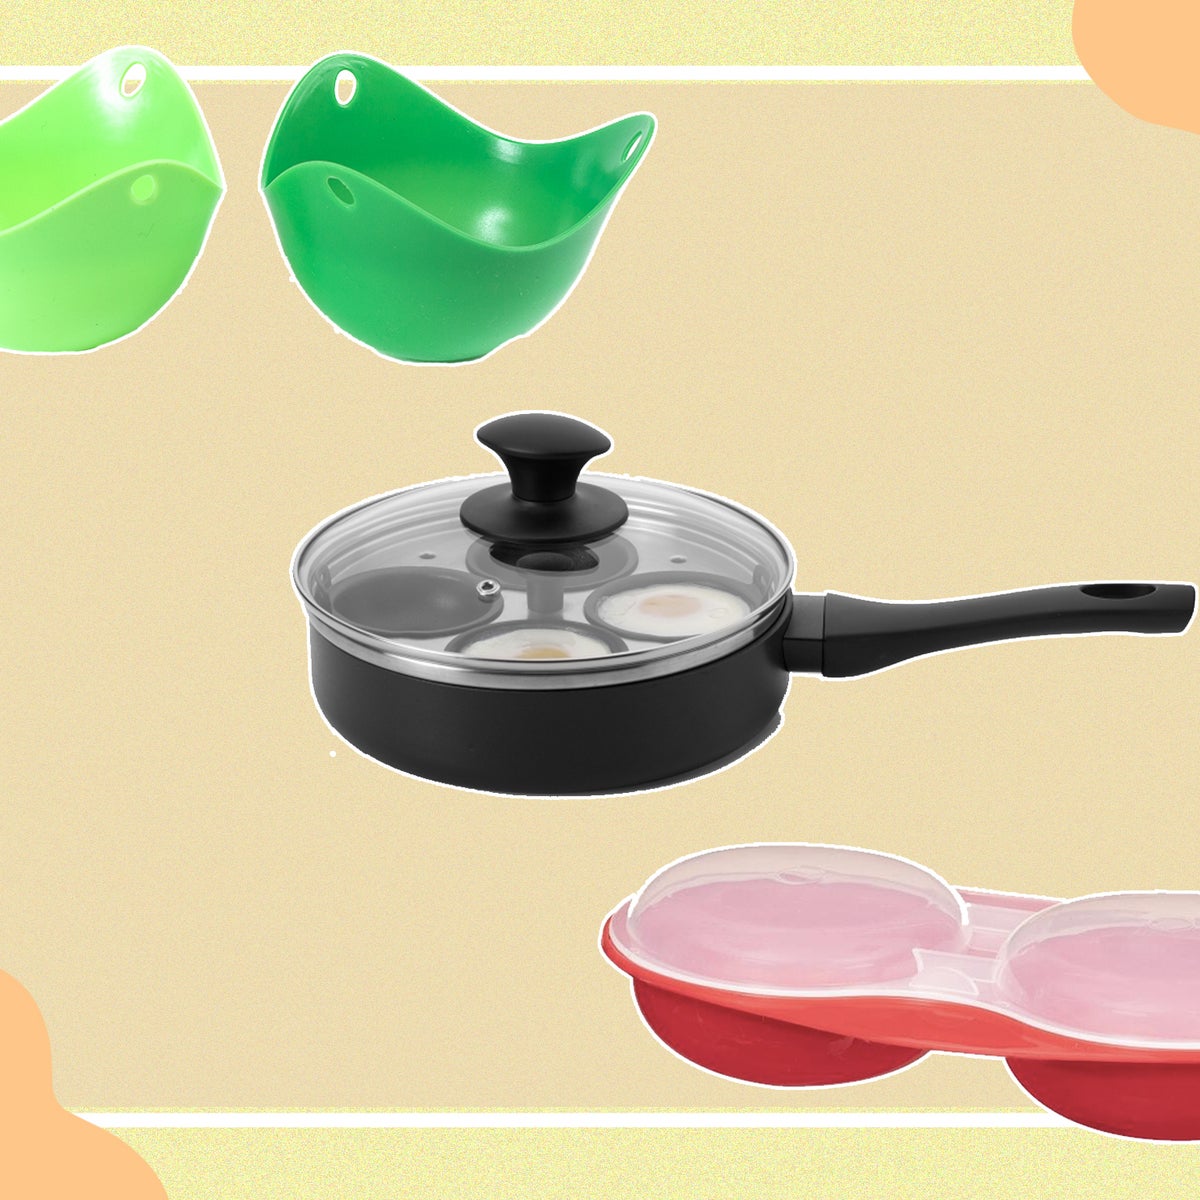 Best egg poachers 2021: Cups, gadgets, pans and more